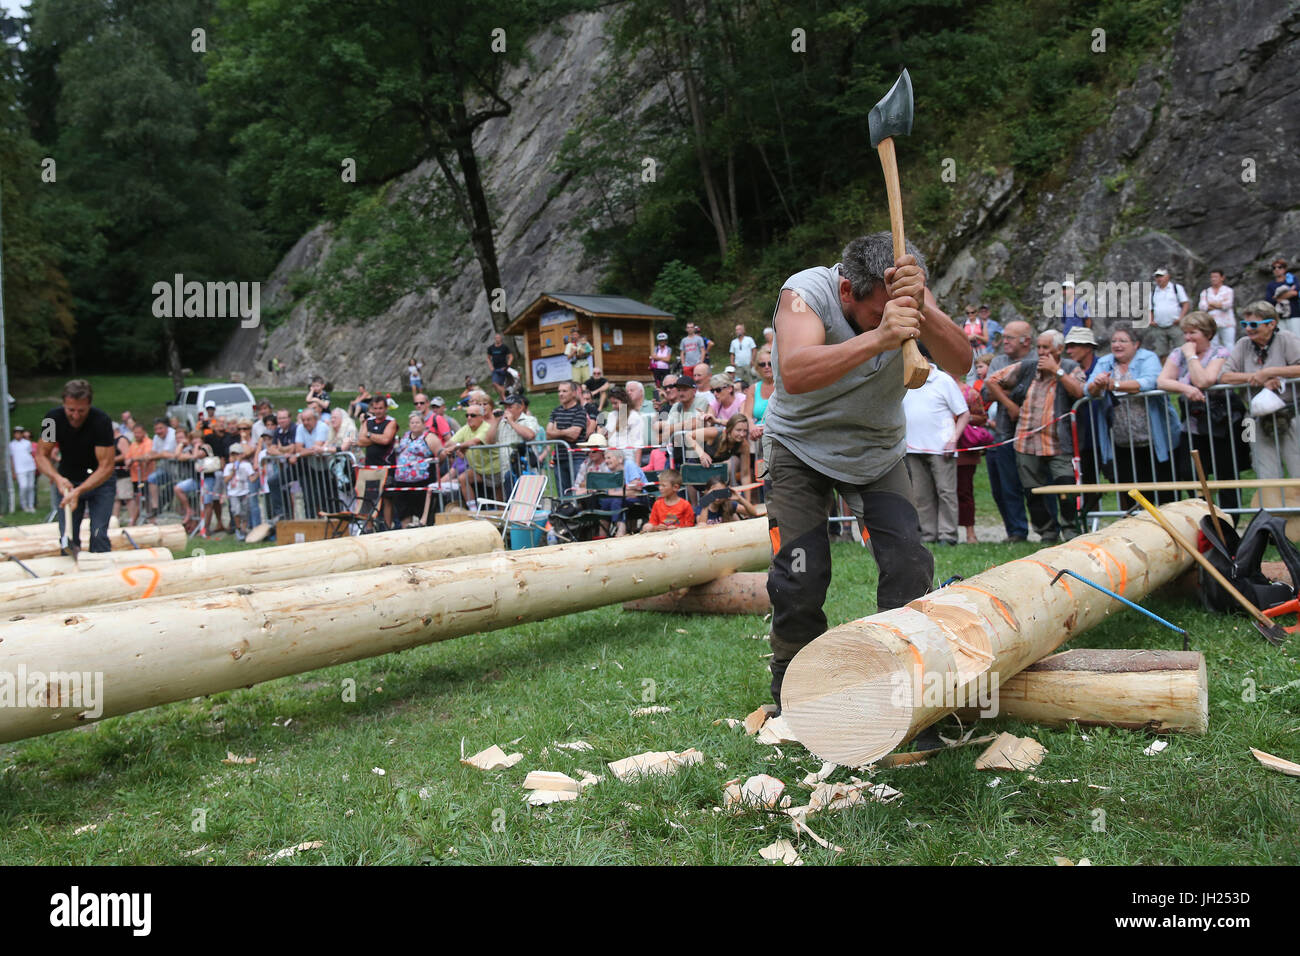 Lumberjack competition and demonstration.  France. Stock Photo